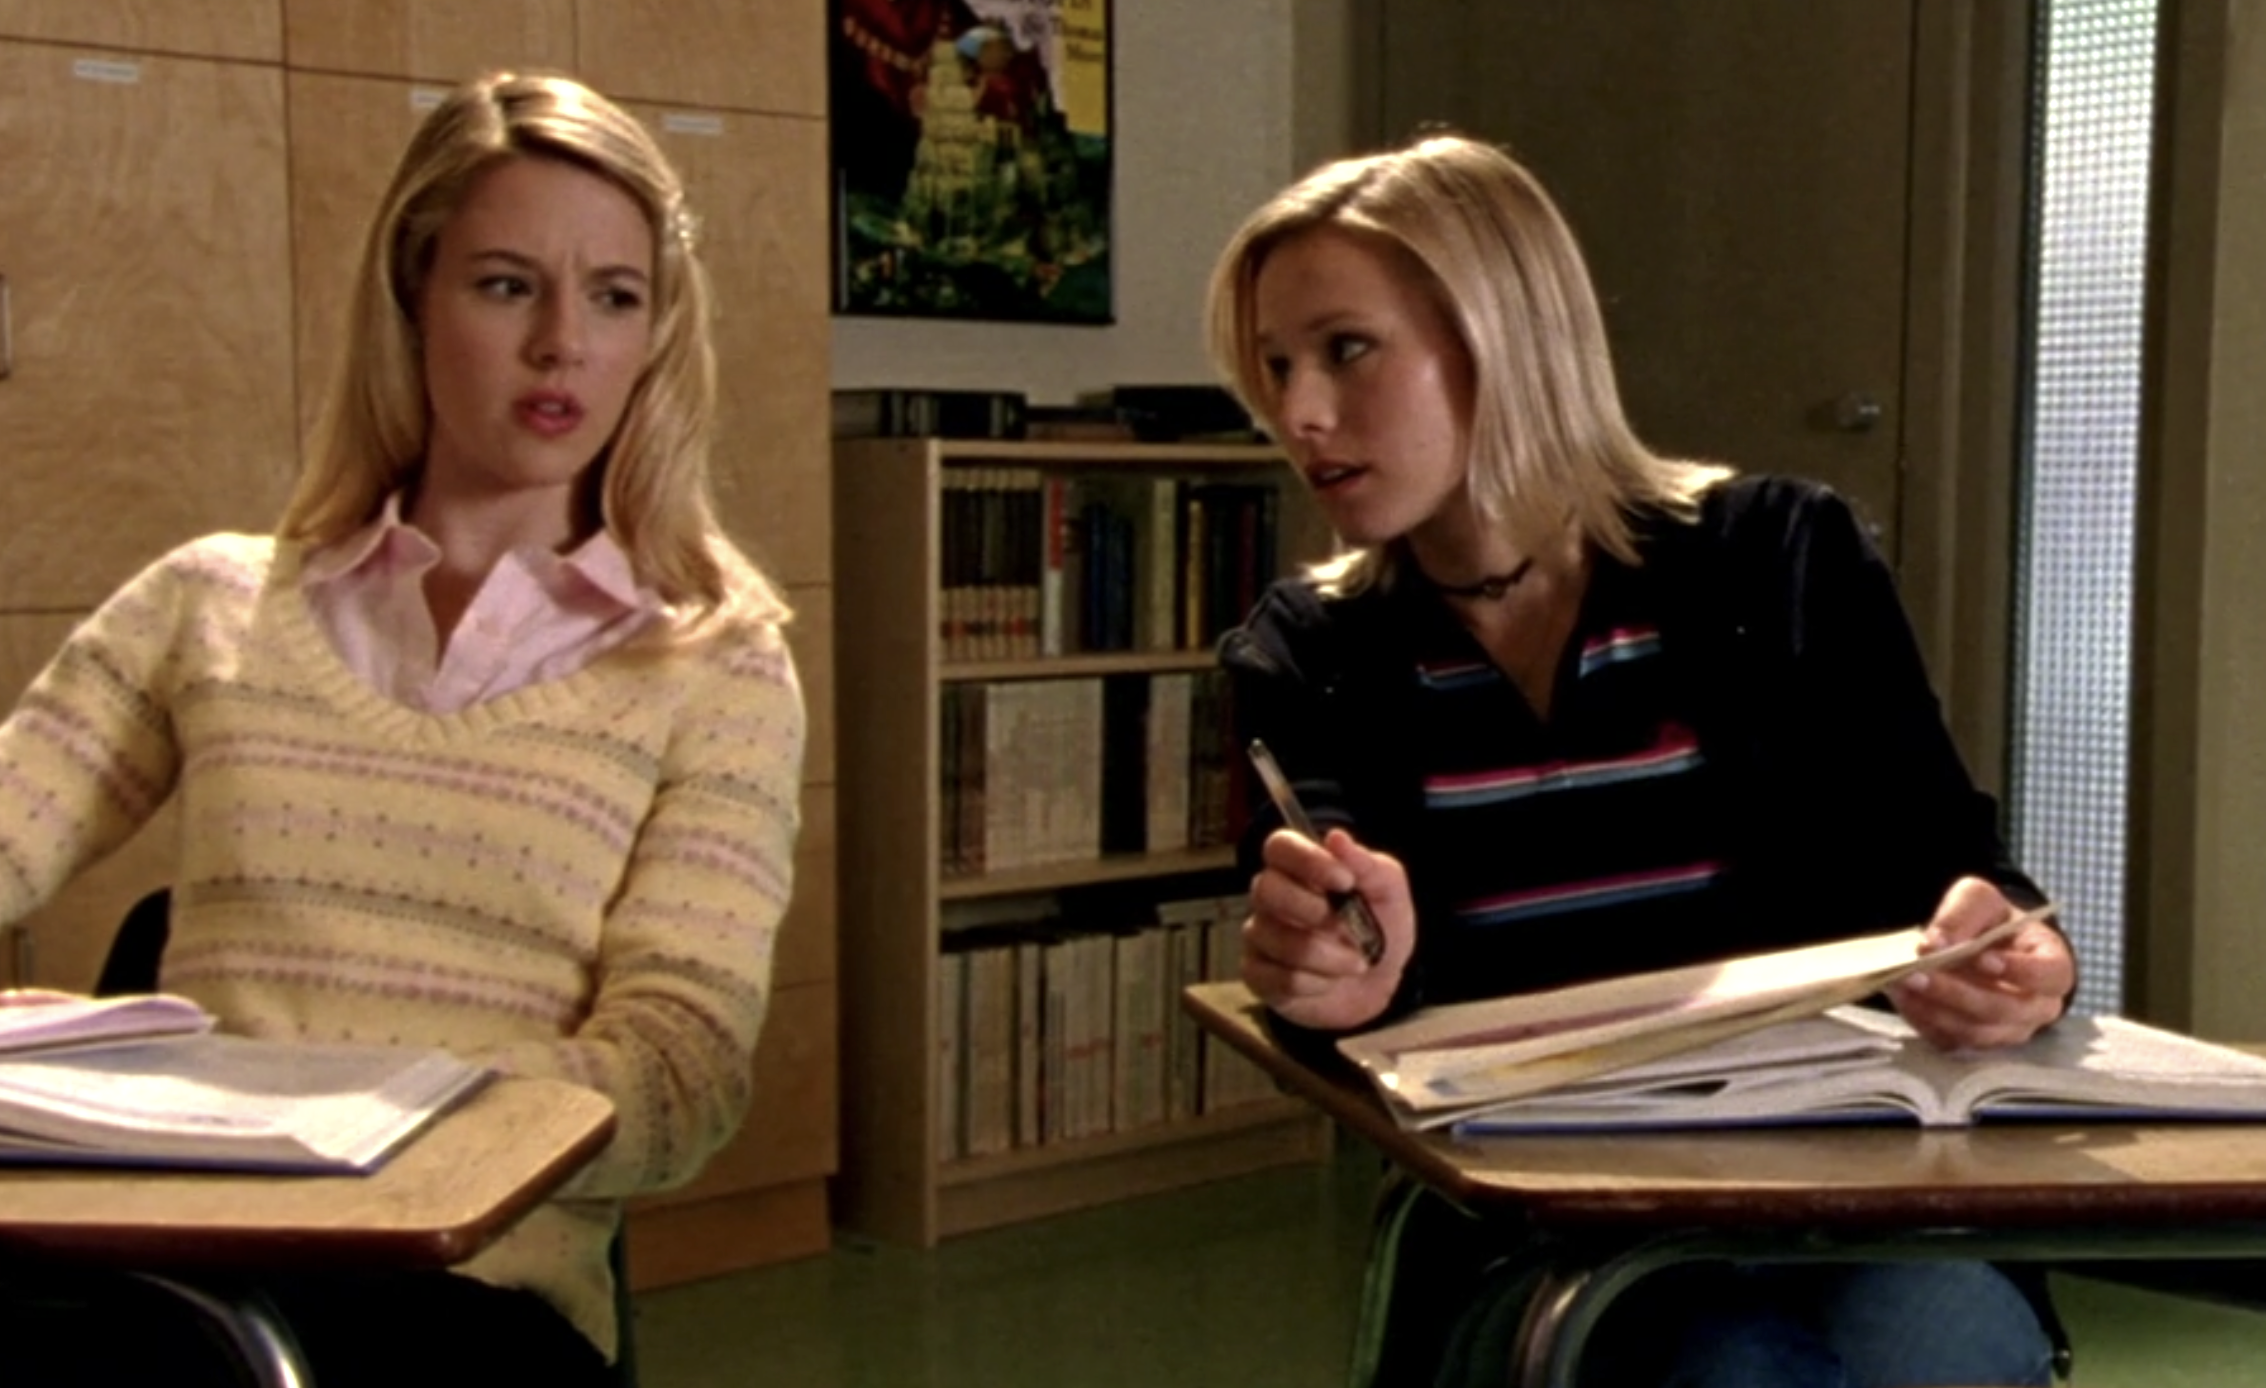 Screenshot of Veronica Mars S1E8. Veronica and Meg are sitting at desks in a classroom. They're leaning towards each other to have a clandestine conversation.